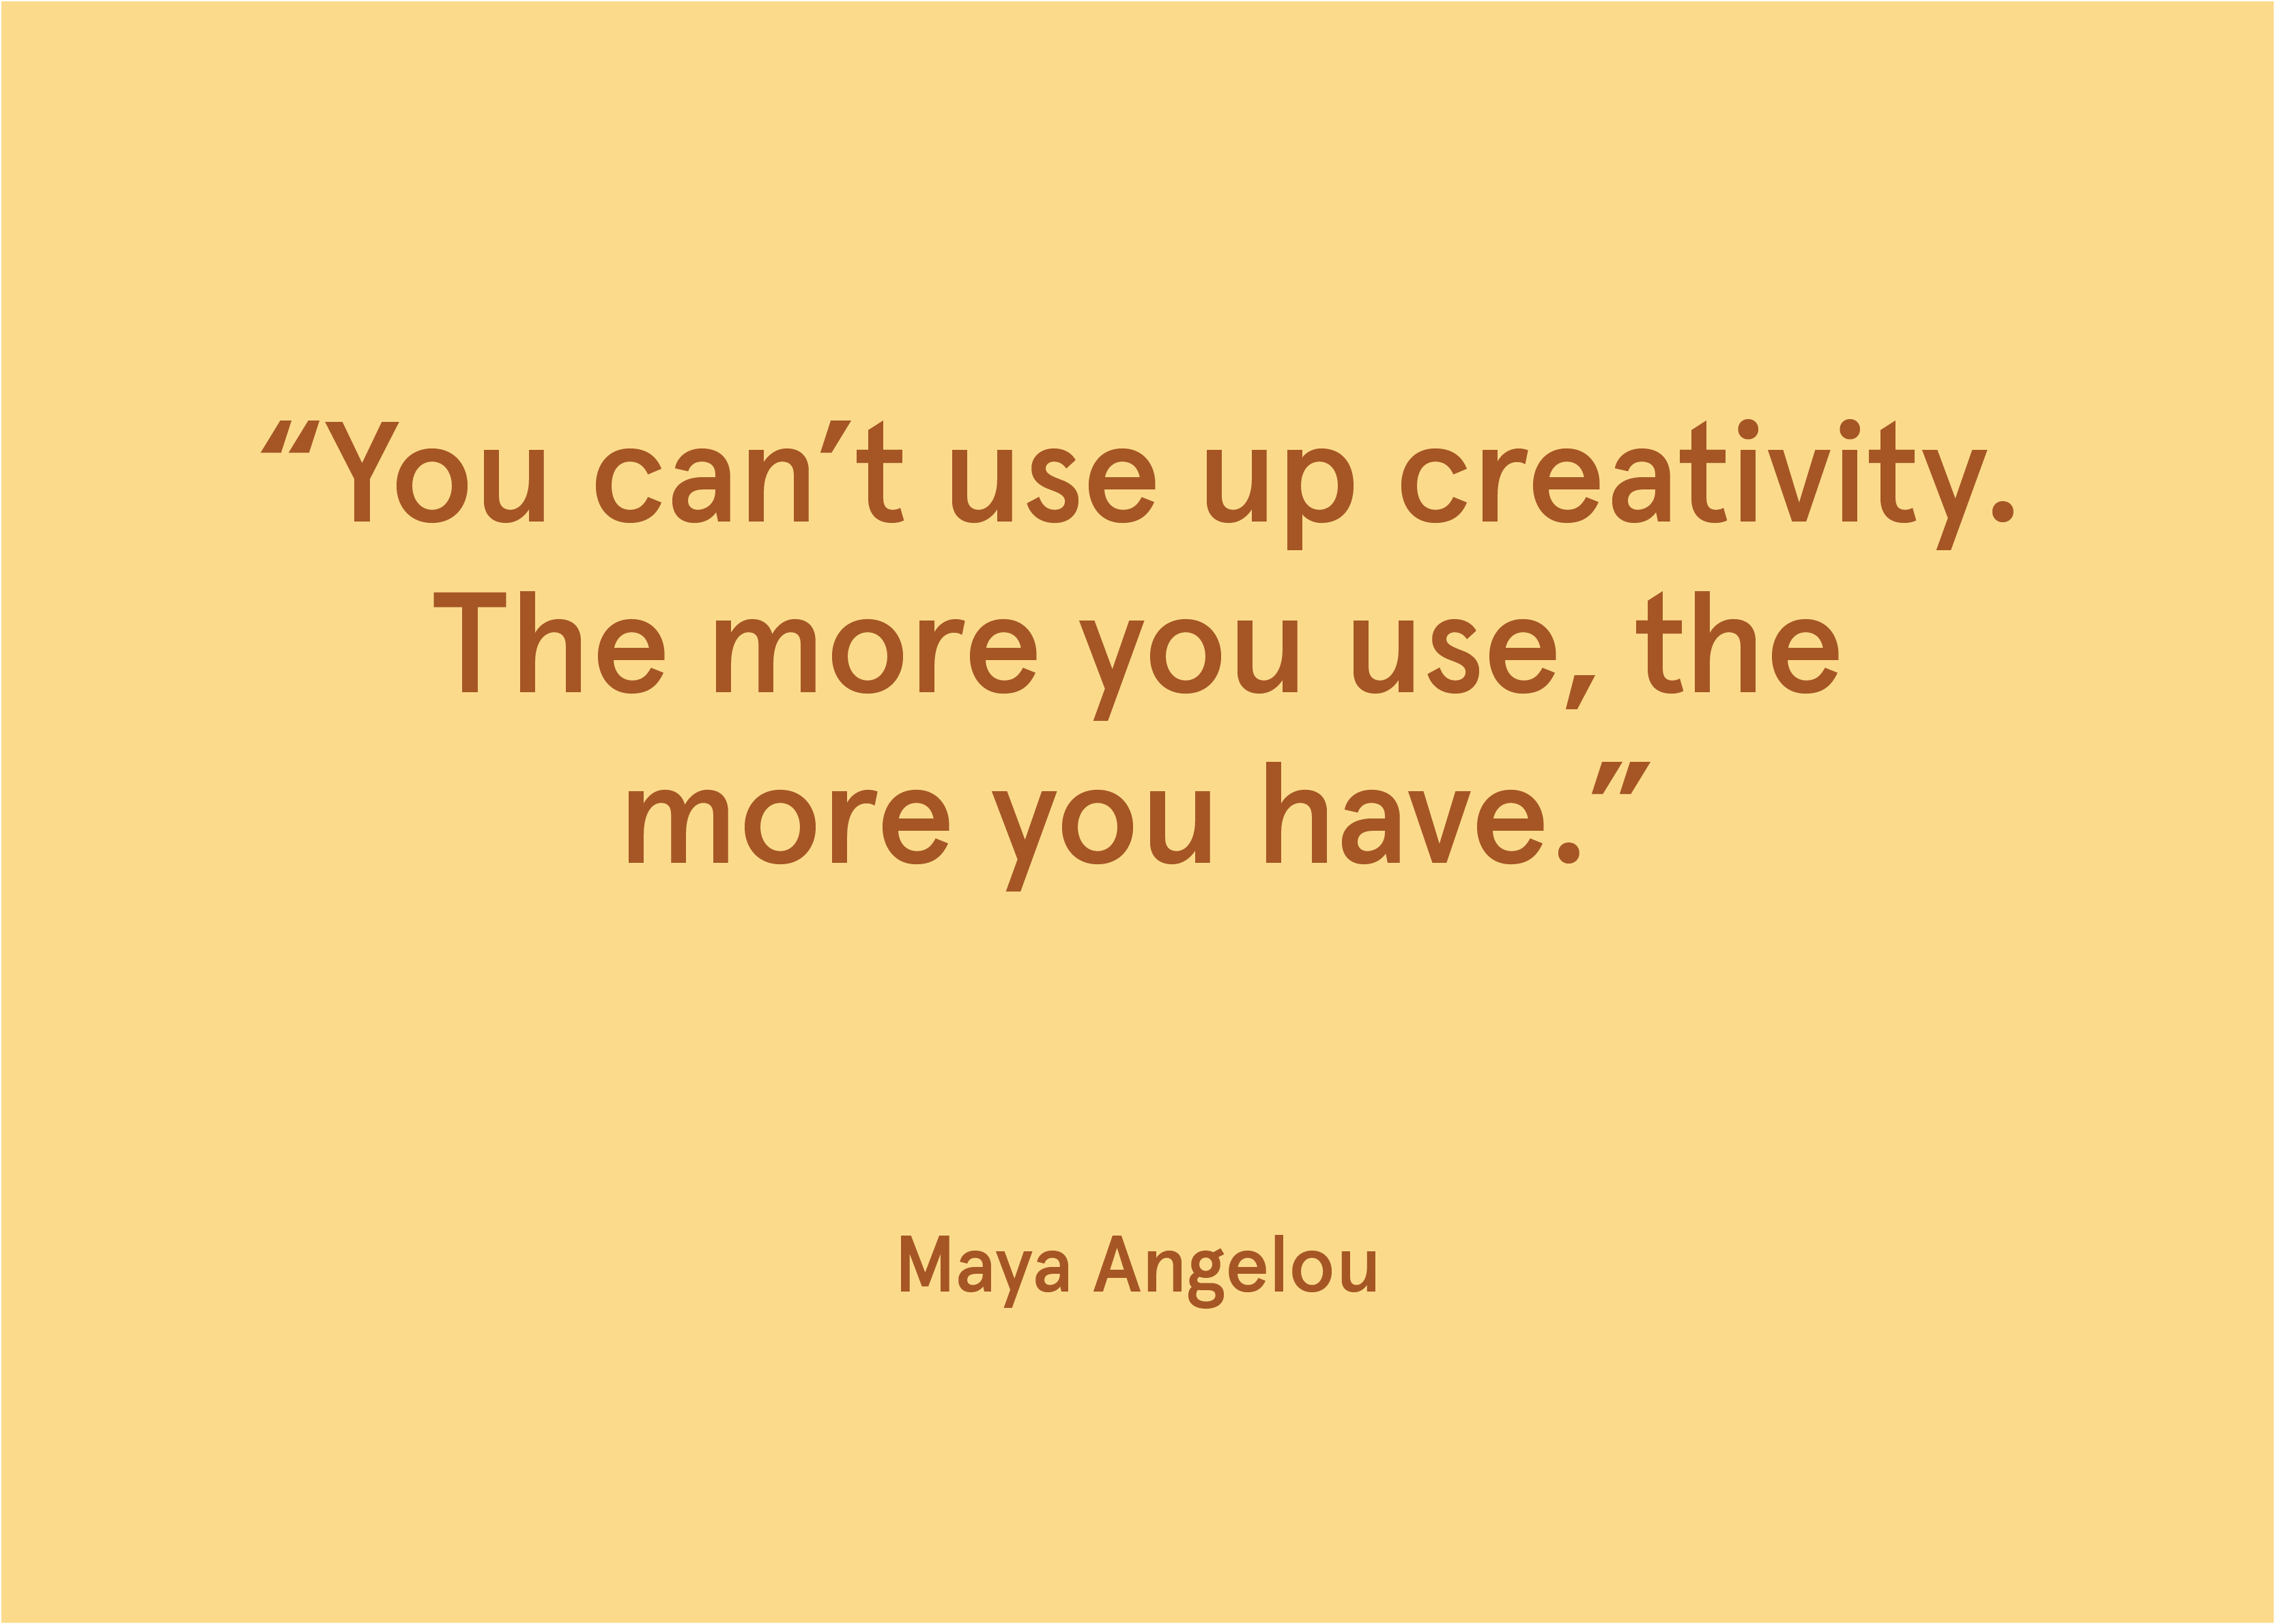 21 inspiring creativity quotes that'll get your ideas flowing